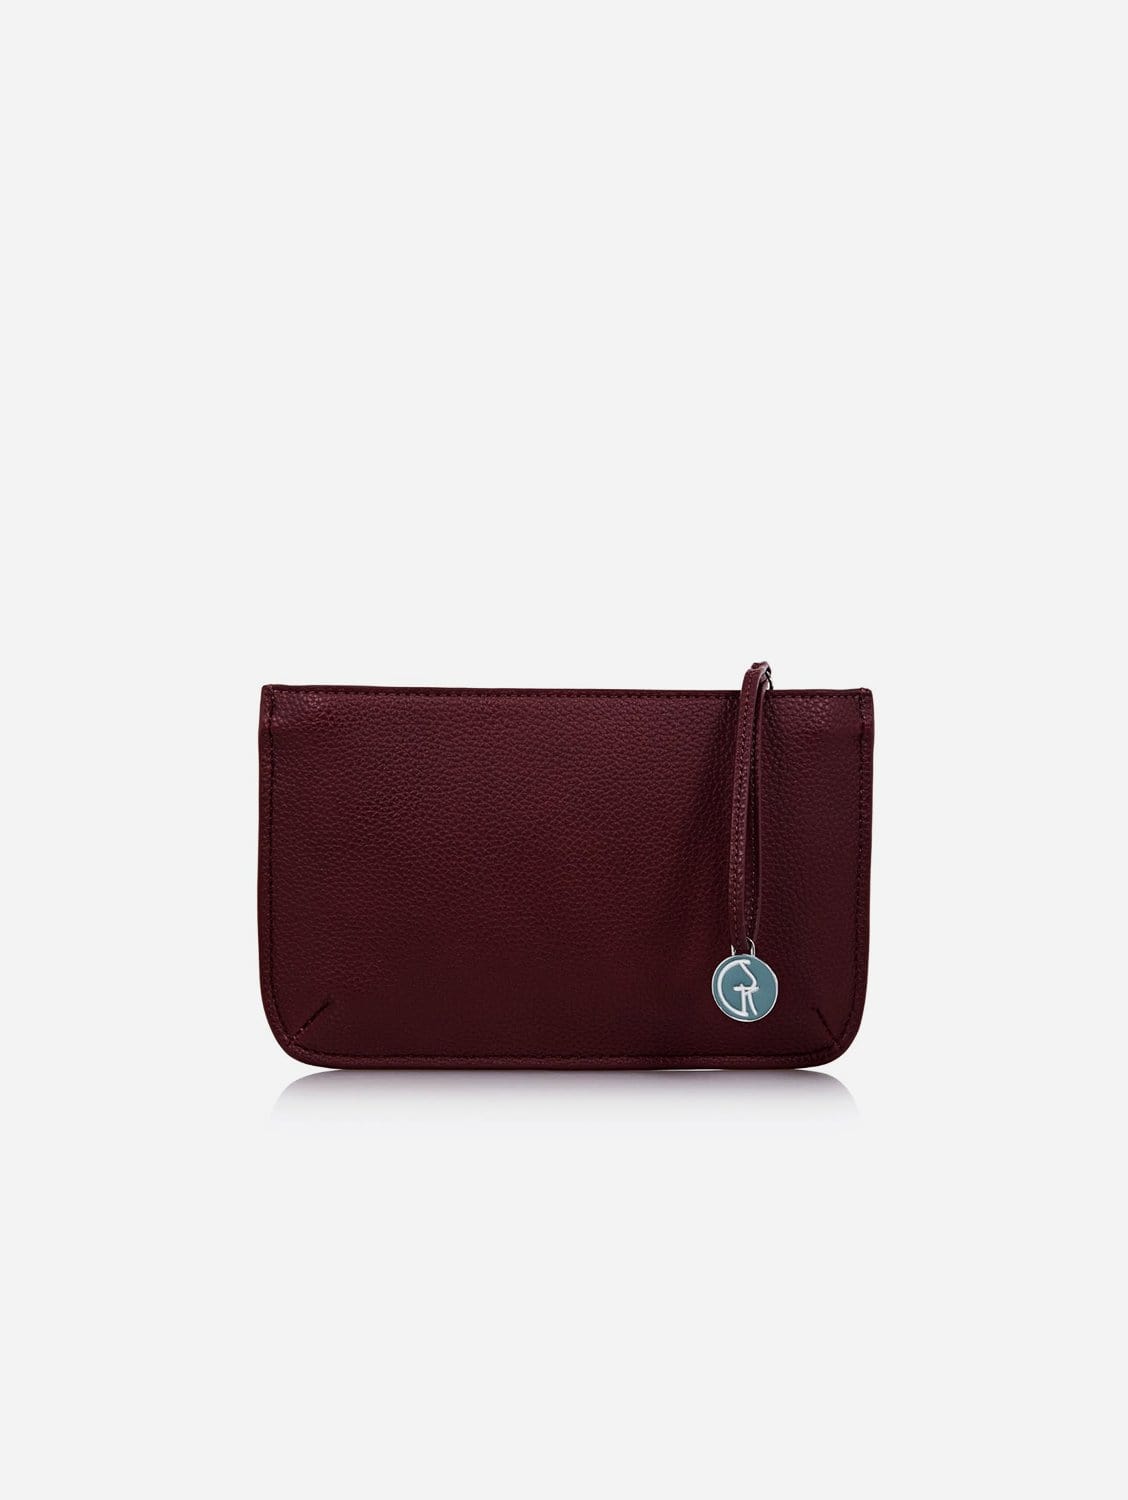 The Morphbag by GSK Vegan Leather Multi-Function Clutch In Red